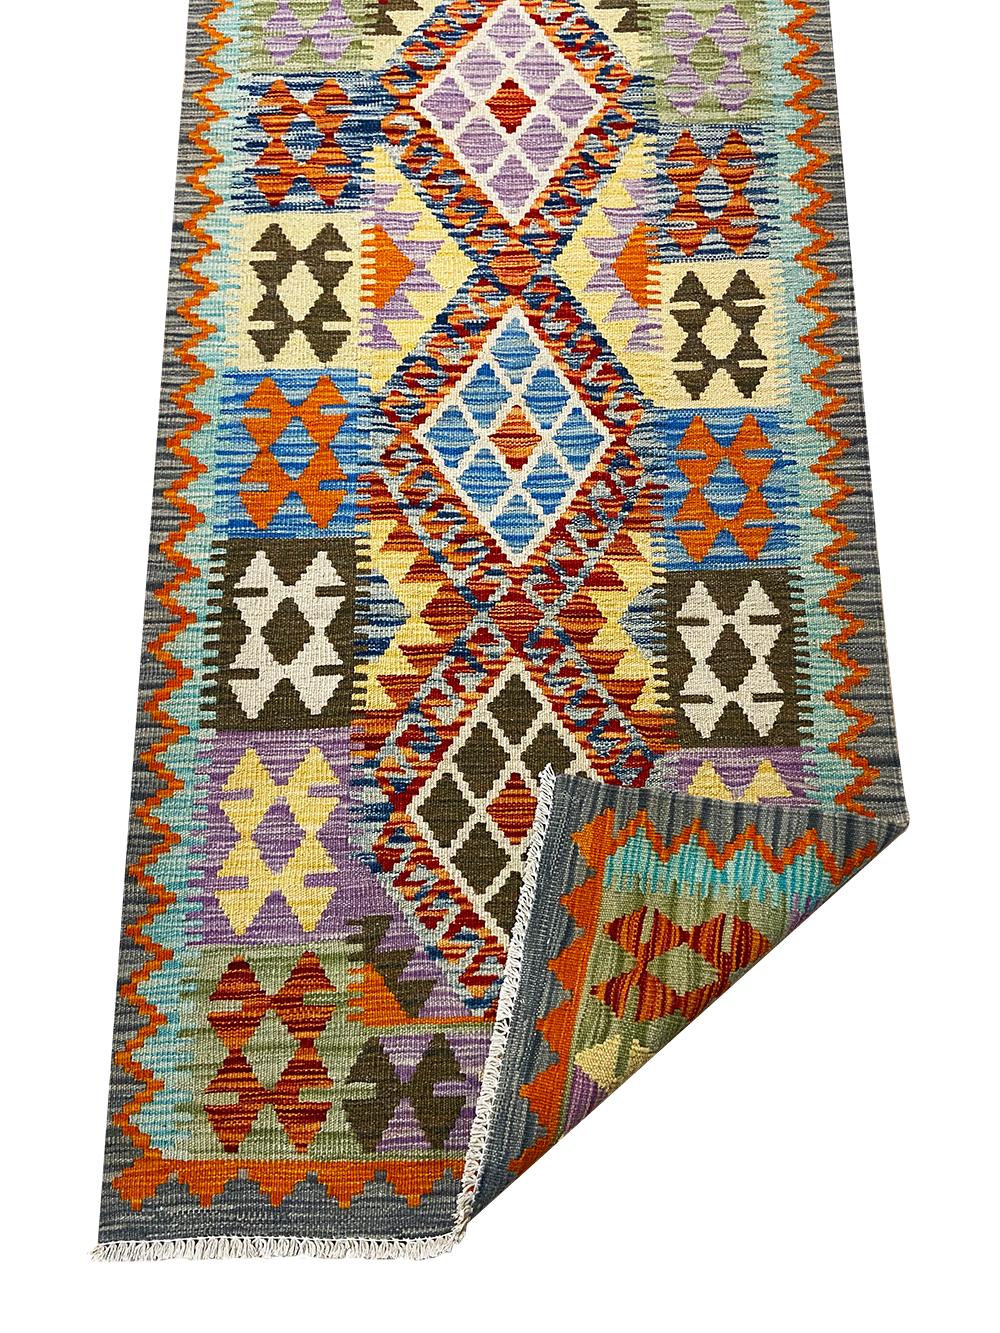 Afghan All Wool Colorful Kilim Runner 2′ 10″ x 9′ 1″ For Sale